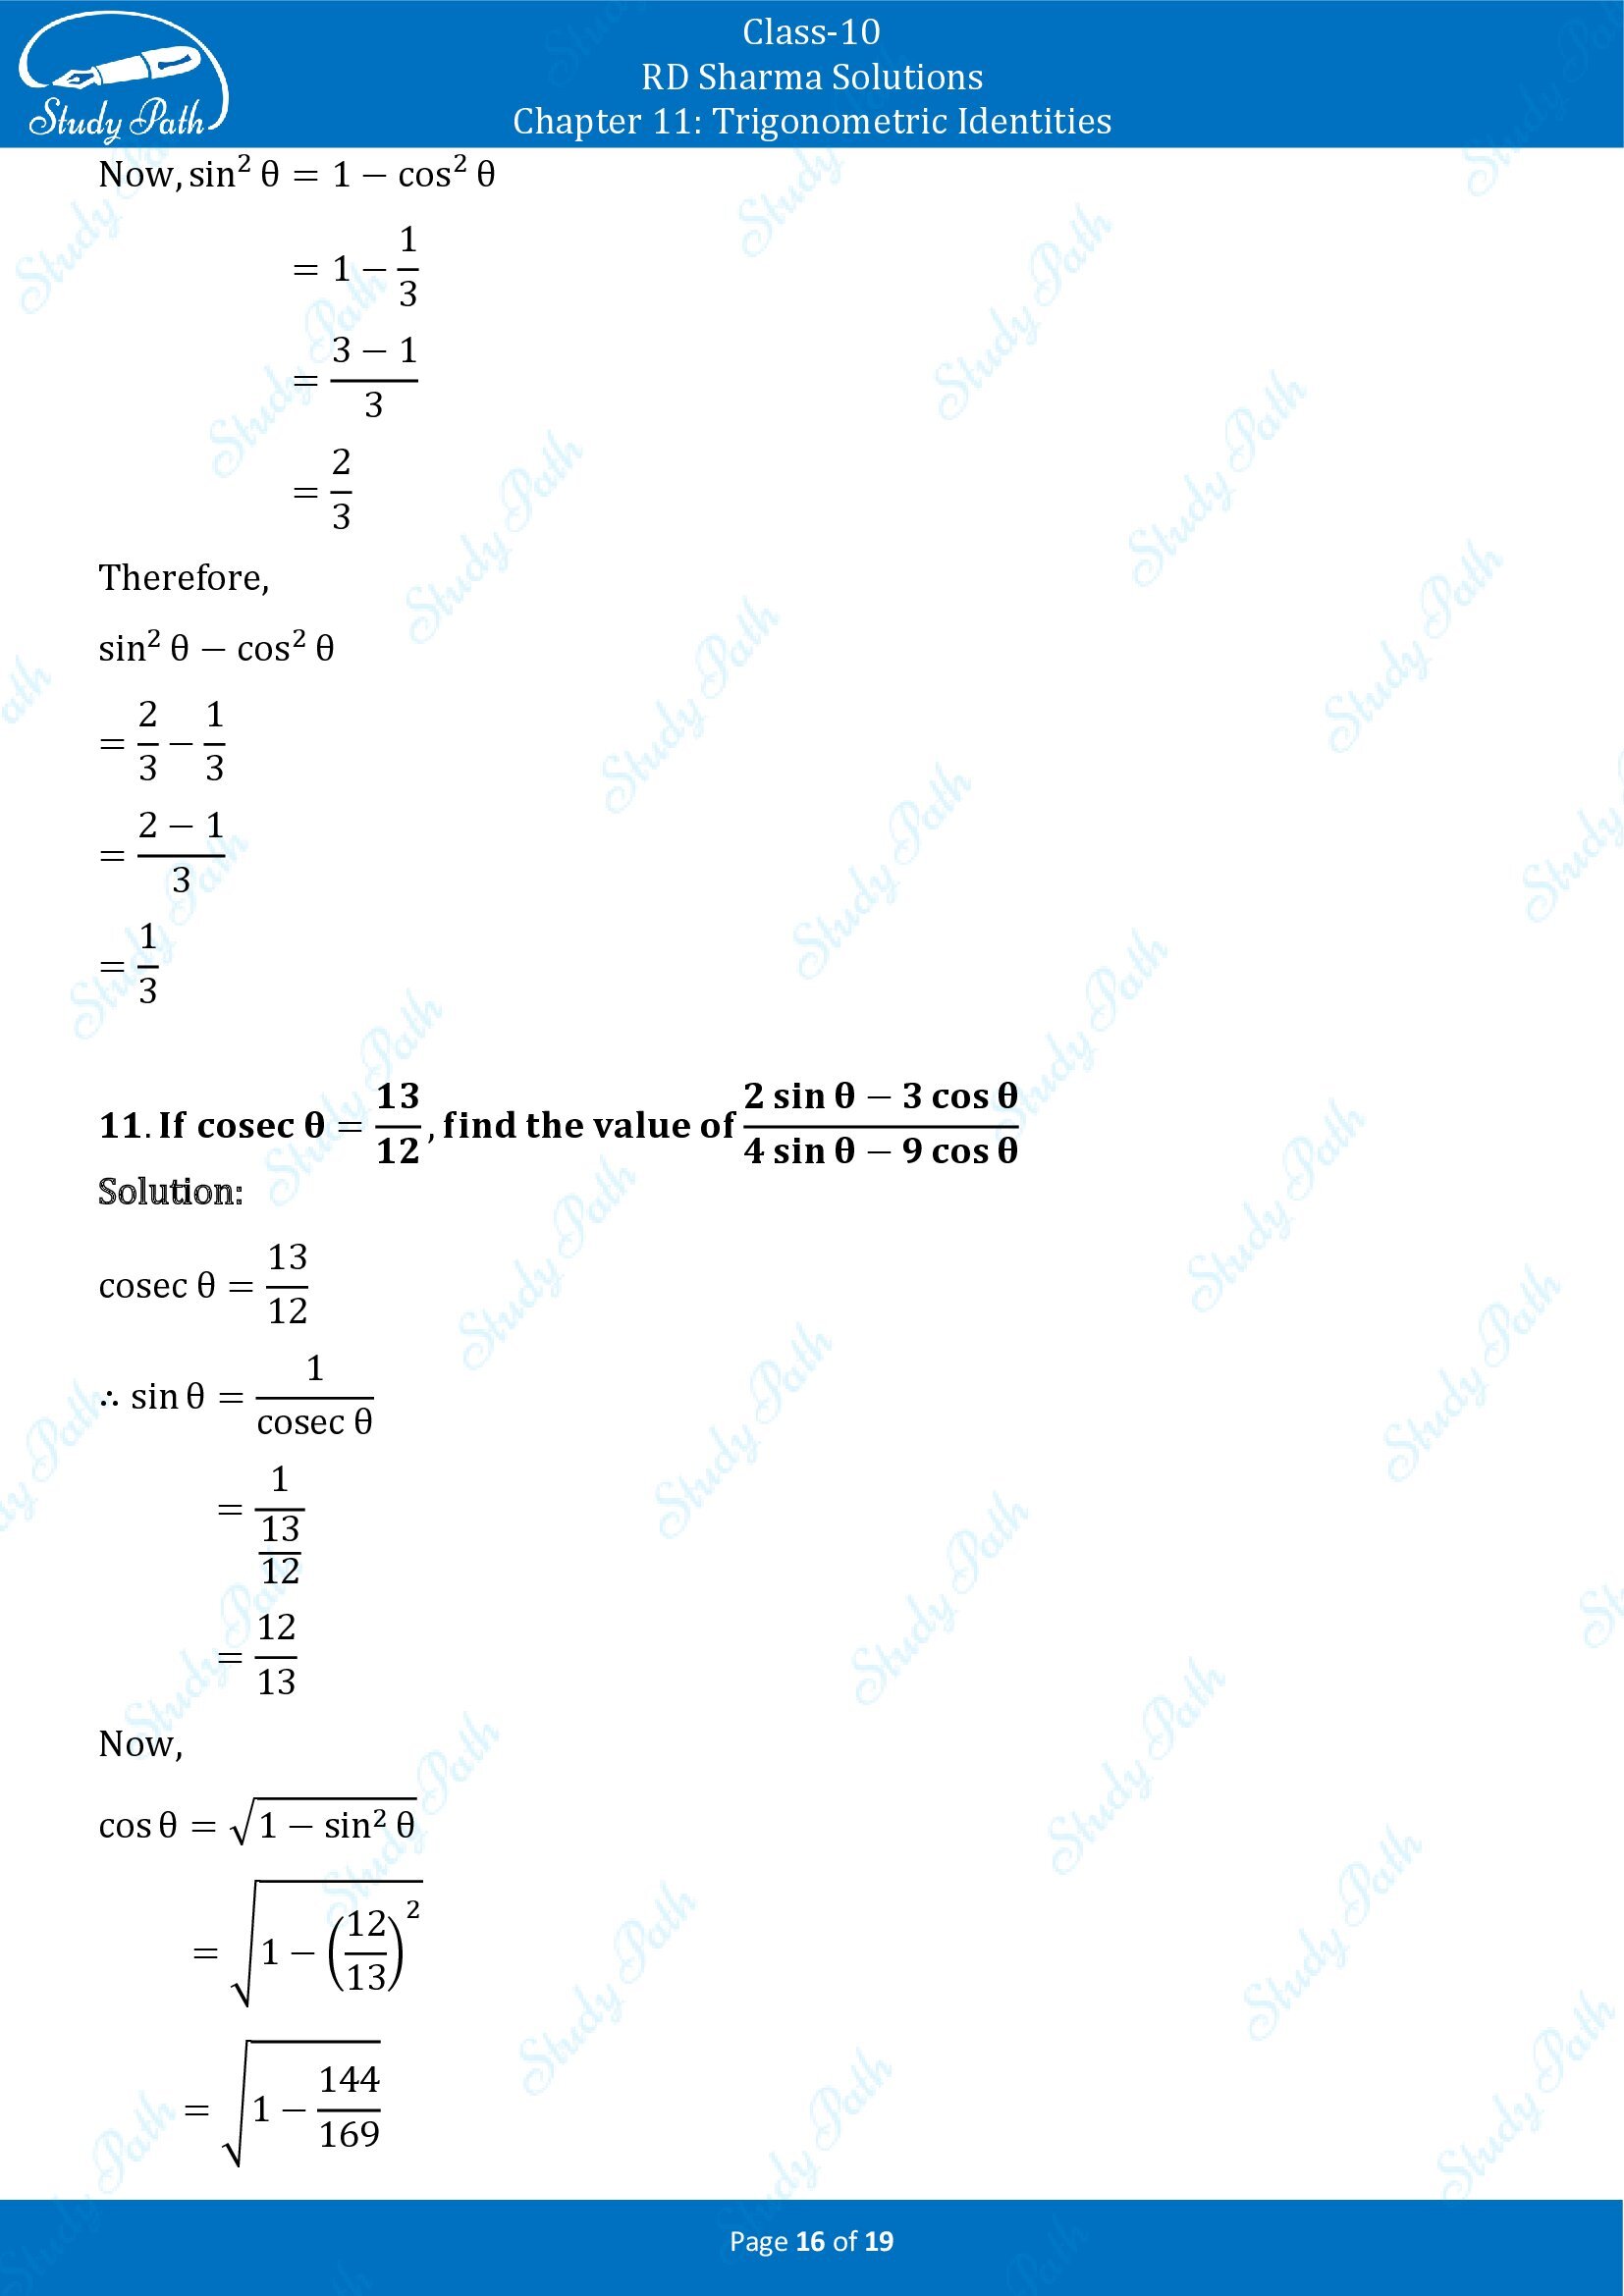 RD Sharma Solutions Class 10 Chapter 11 Trigonometric Identities Exercise 11.2 00016